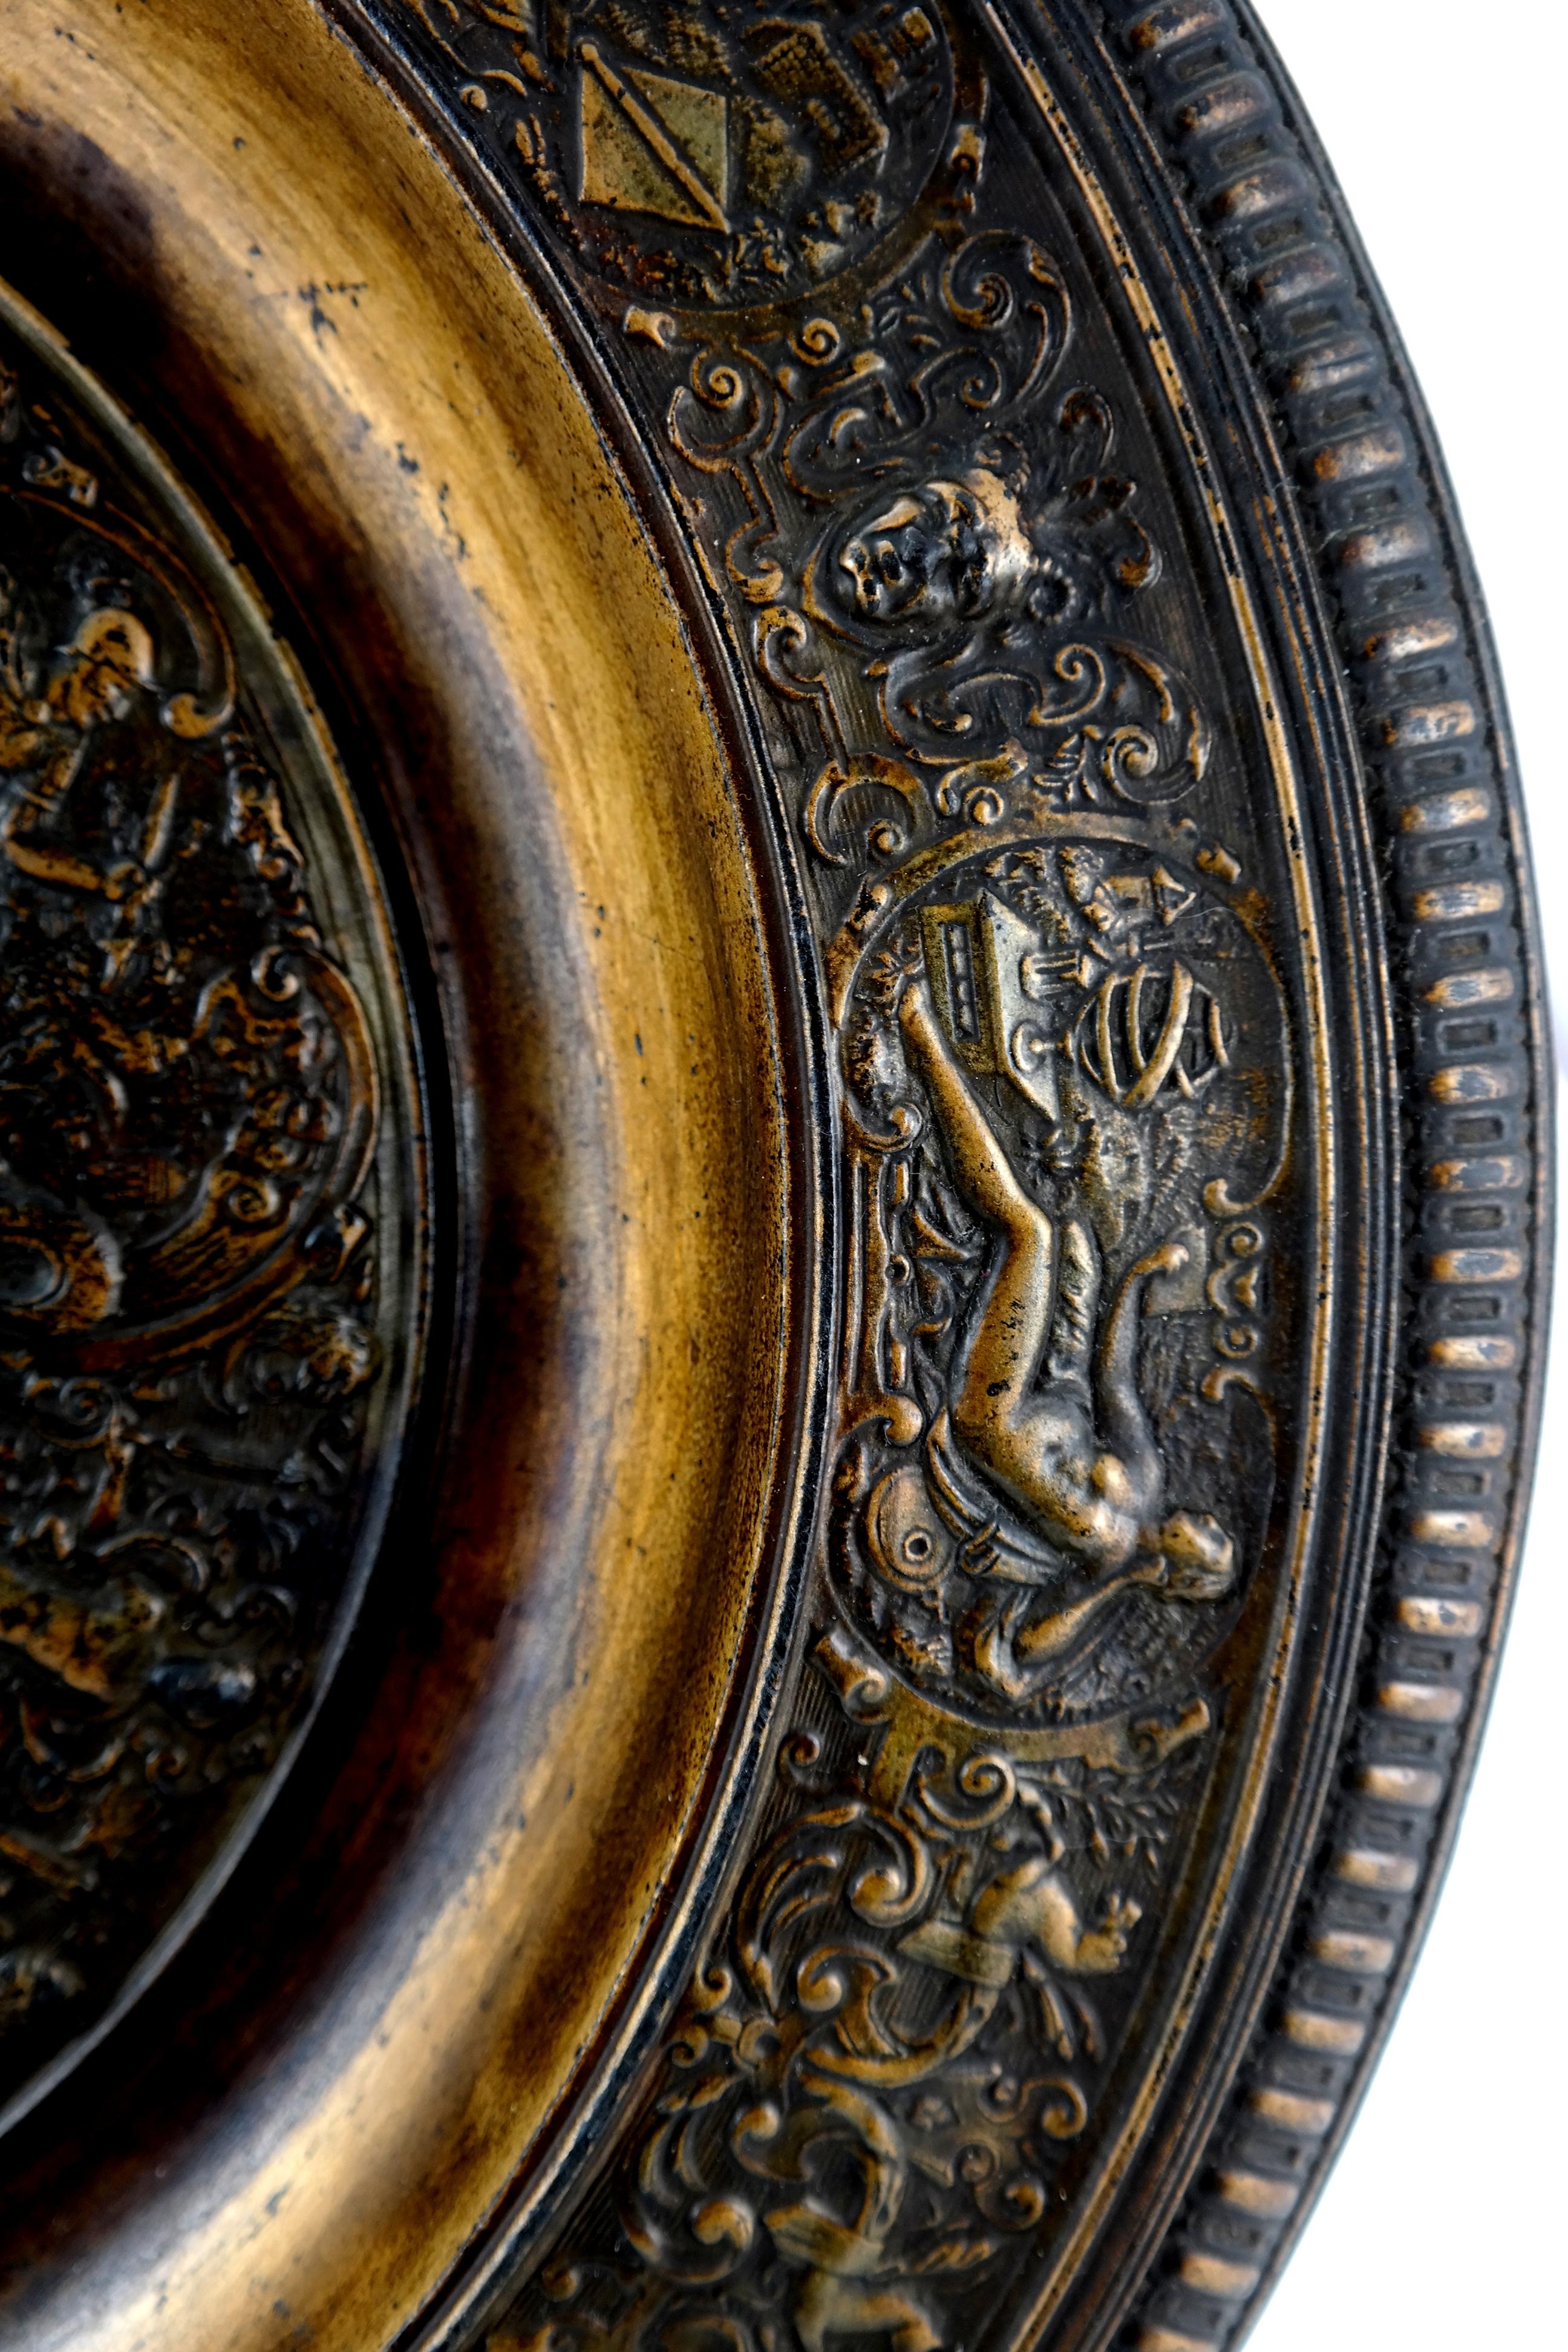 Cast iron charger with mythological scenes
Signed: ANINA
Early 20th century. Heavy cast iron charger of round form decorated throughout in roman style with historical or mythological figures.
   